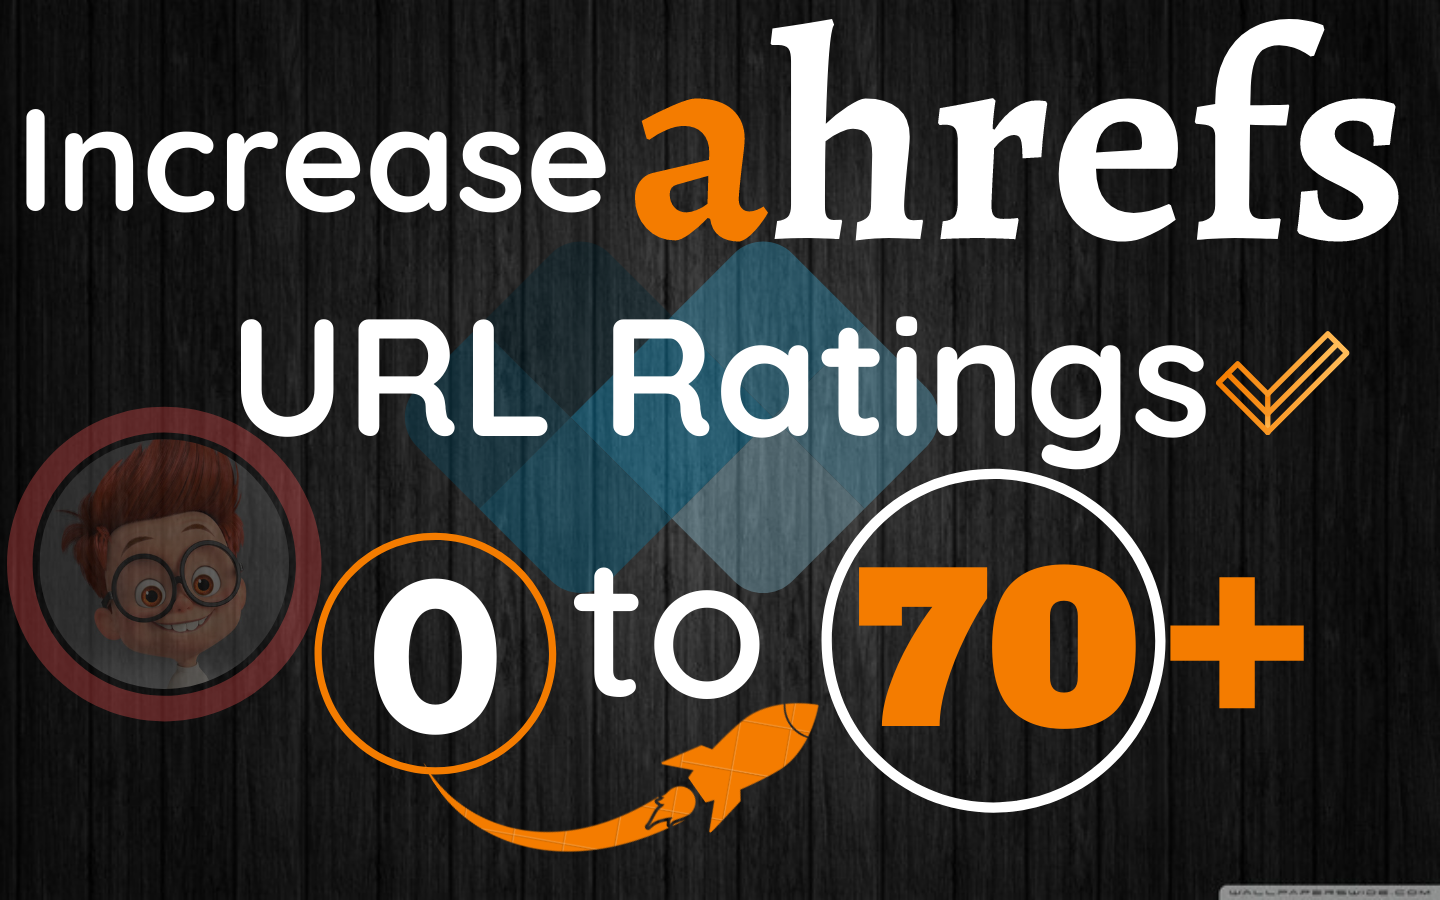 Increase Ahrefs URL Rating UR 0 to 70+ with 100% Guaranteed Result